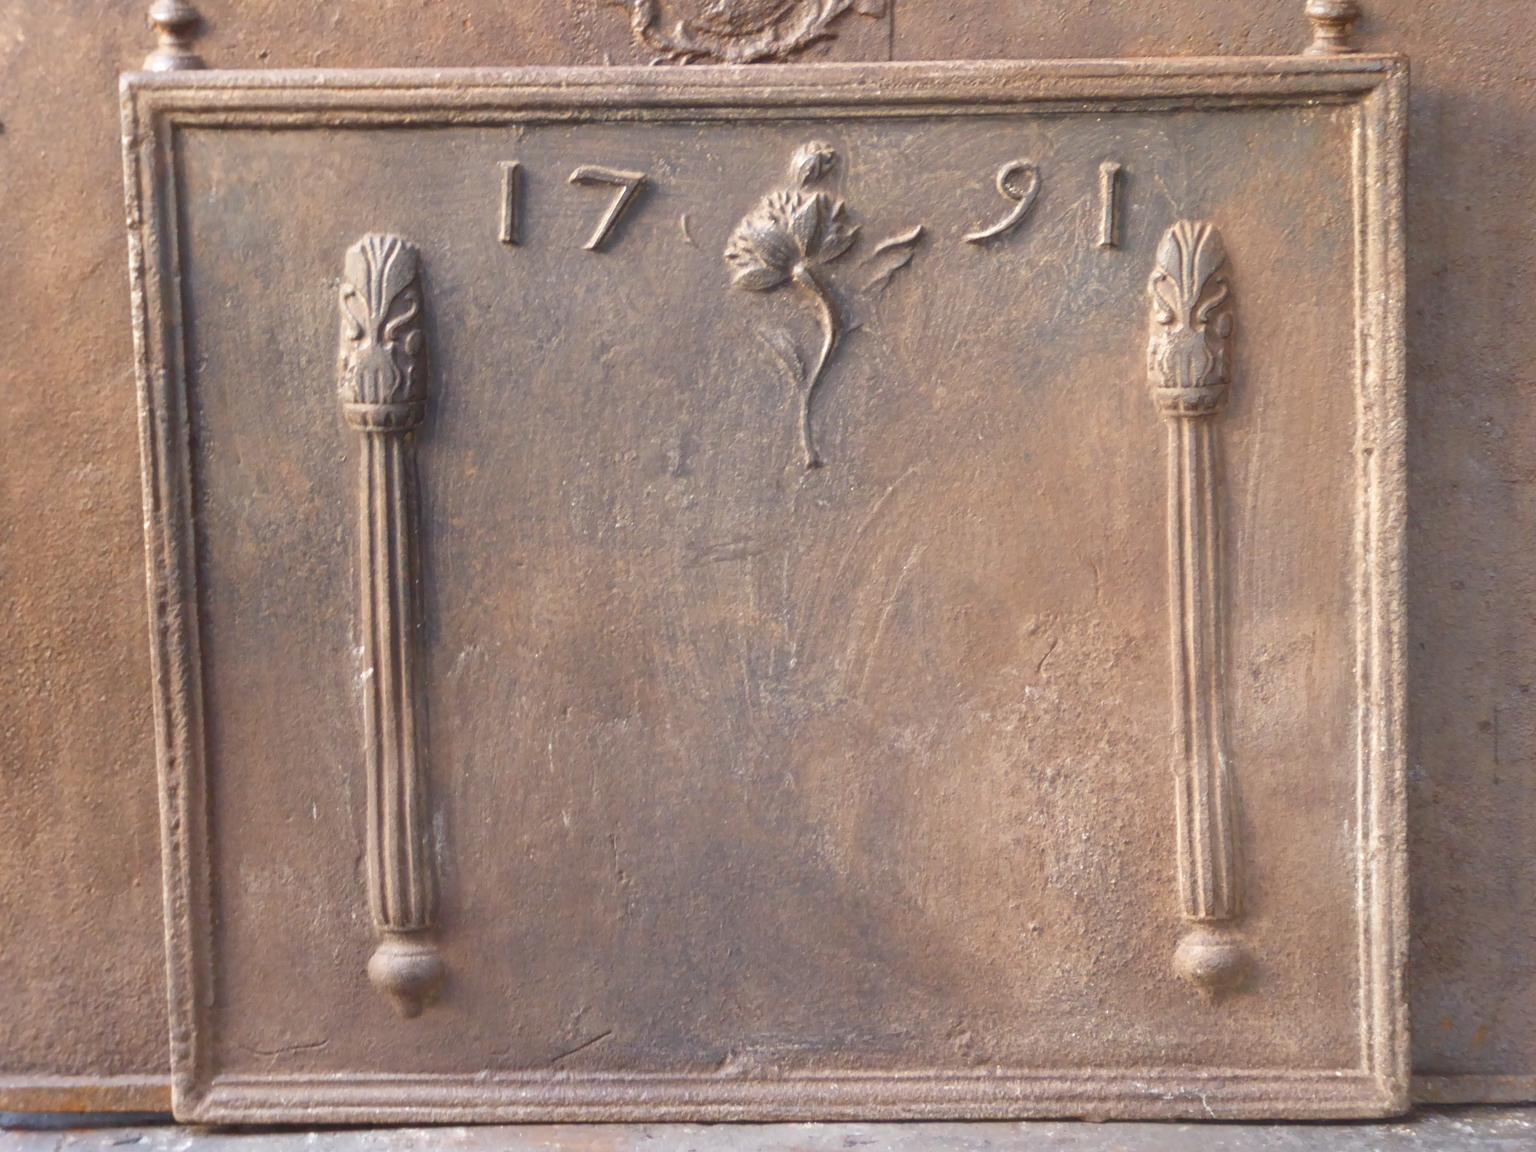 18th century French Louis XV fireback with two Pillars of Hercules. The pillar refers to the club of Hercules and symbolizes strength and the unknown. The date of production, 1791, is also cast in the fireback.

The fireback has a natural brown